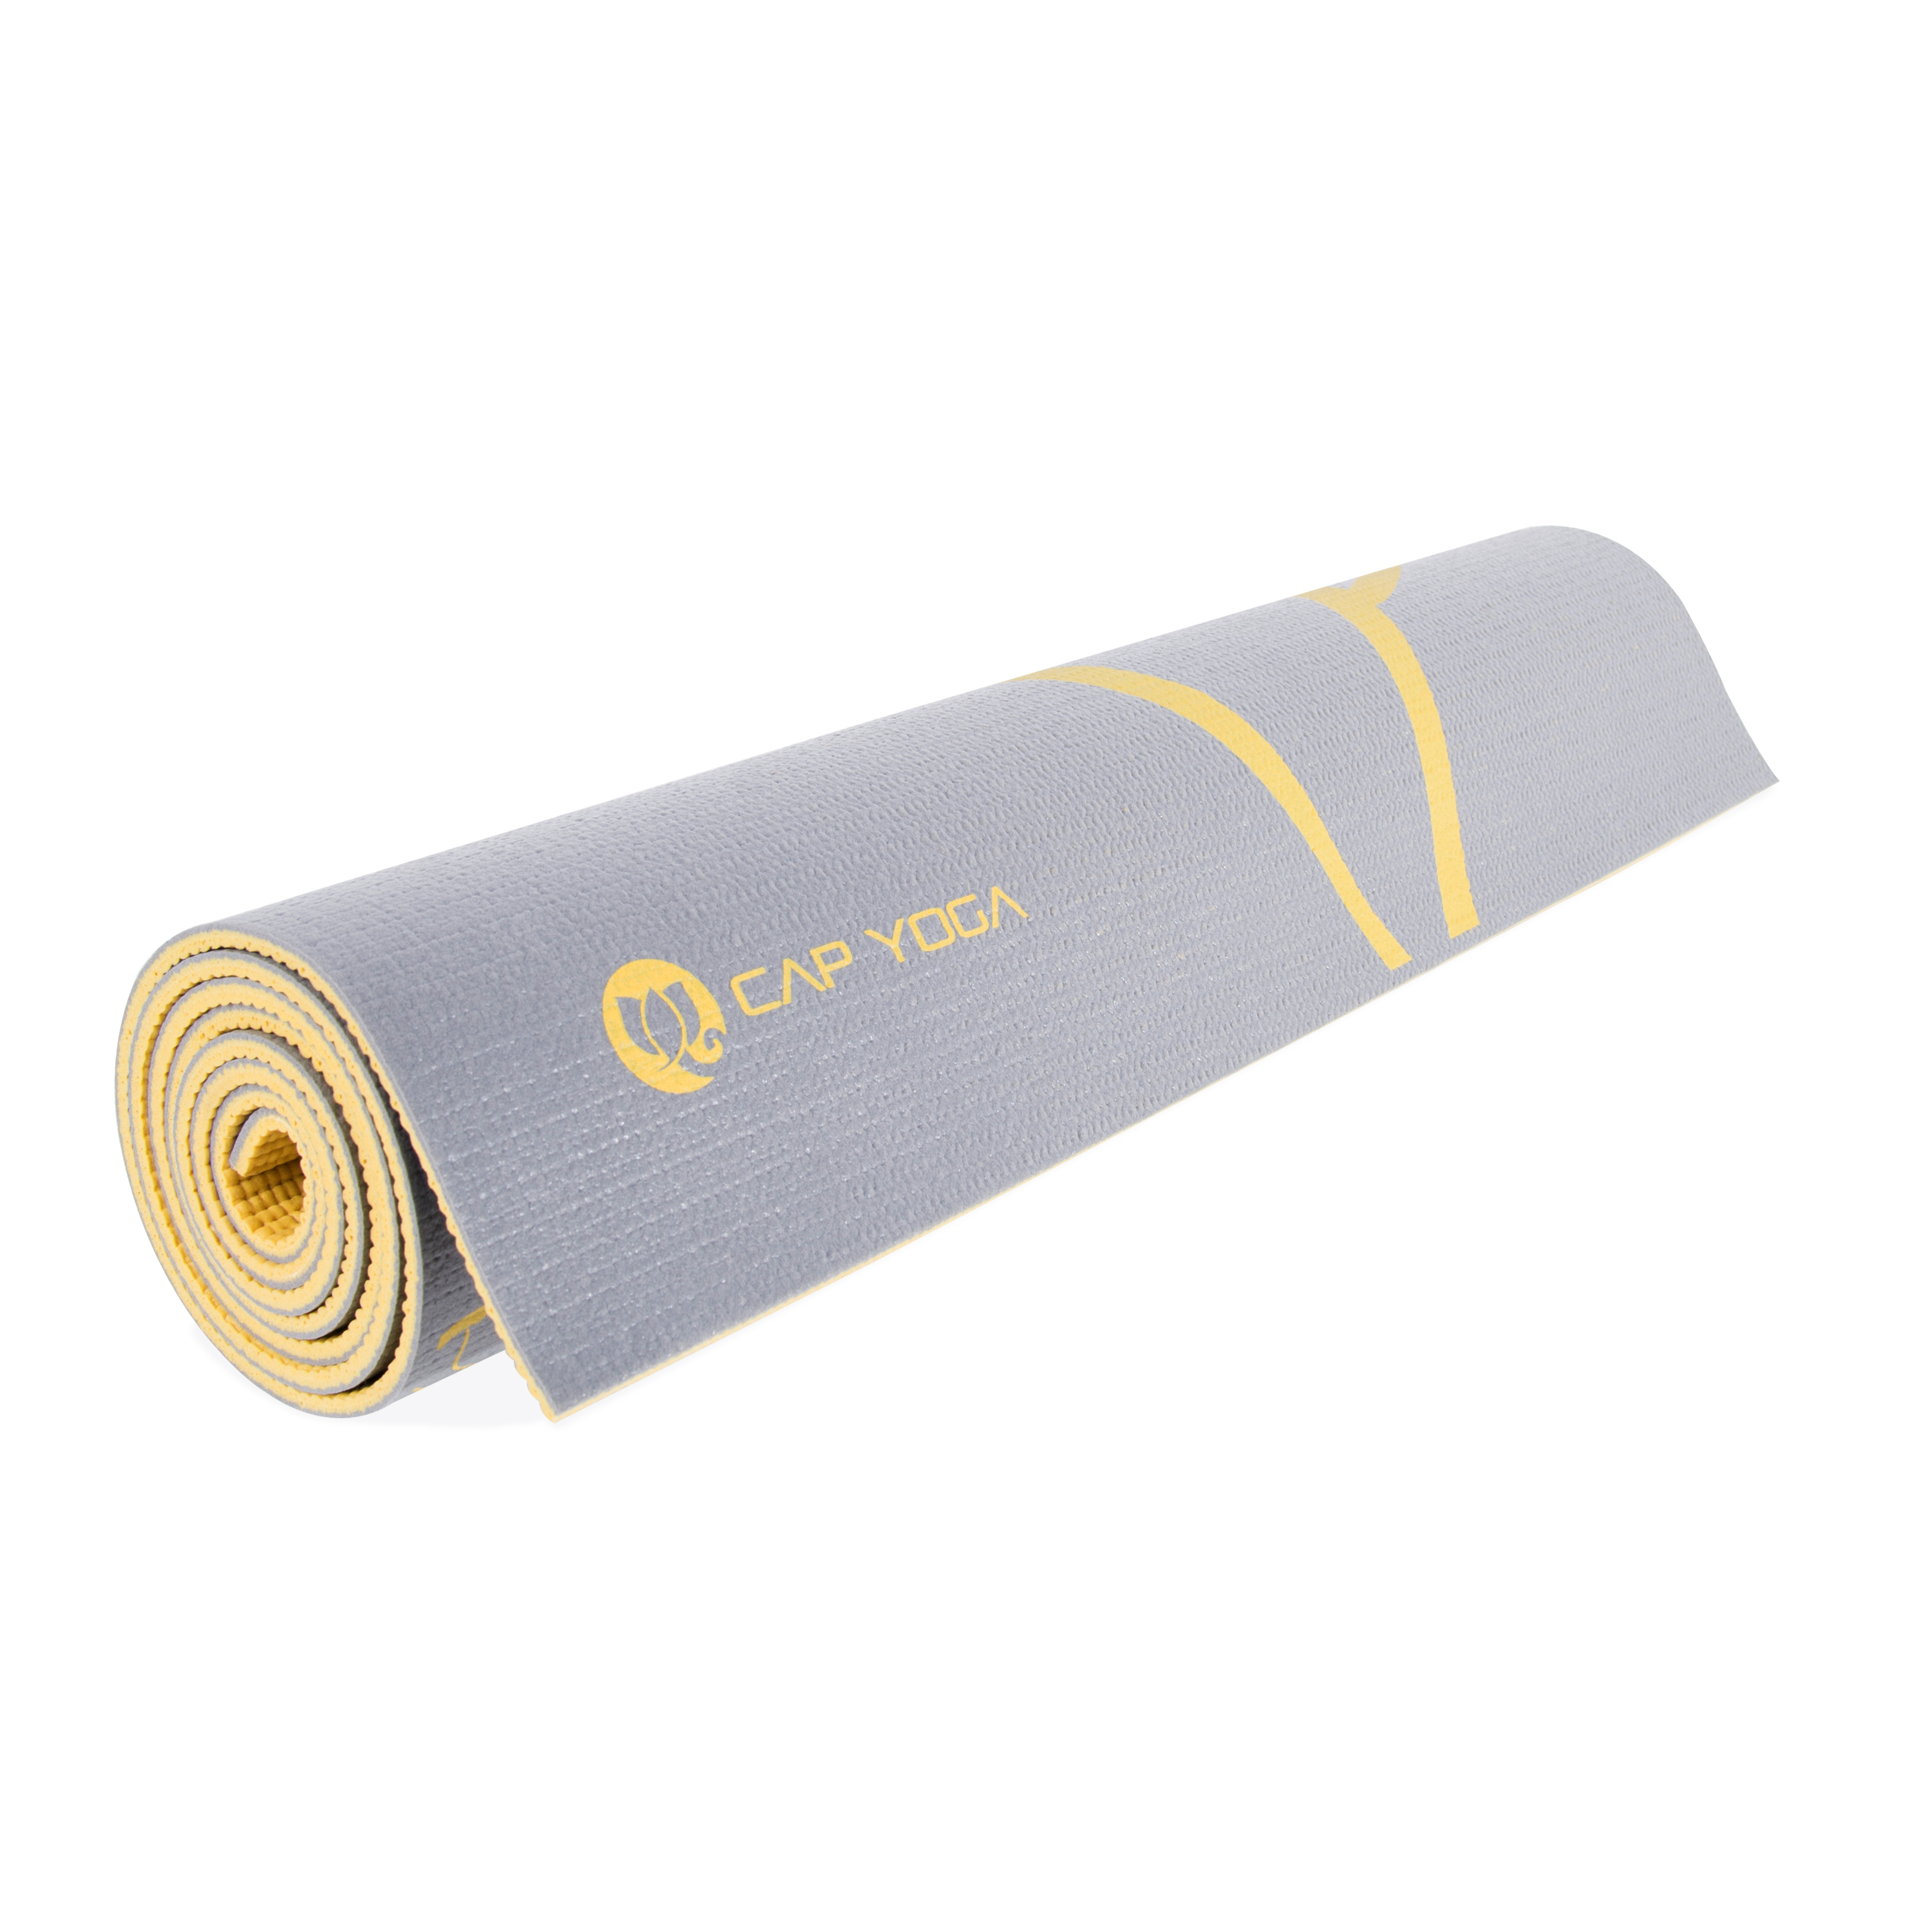 CAP Yoga Reversible Yoga Mat, 5mm with Carry Strap, Dahlia and Ginkgo - image 5 of 5